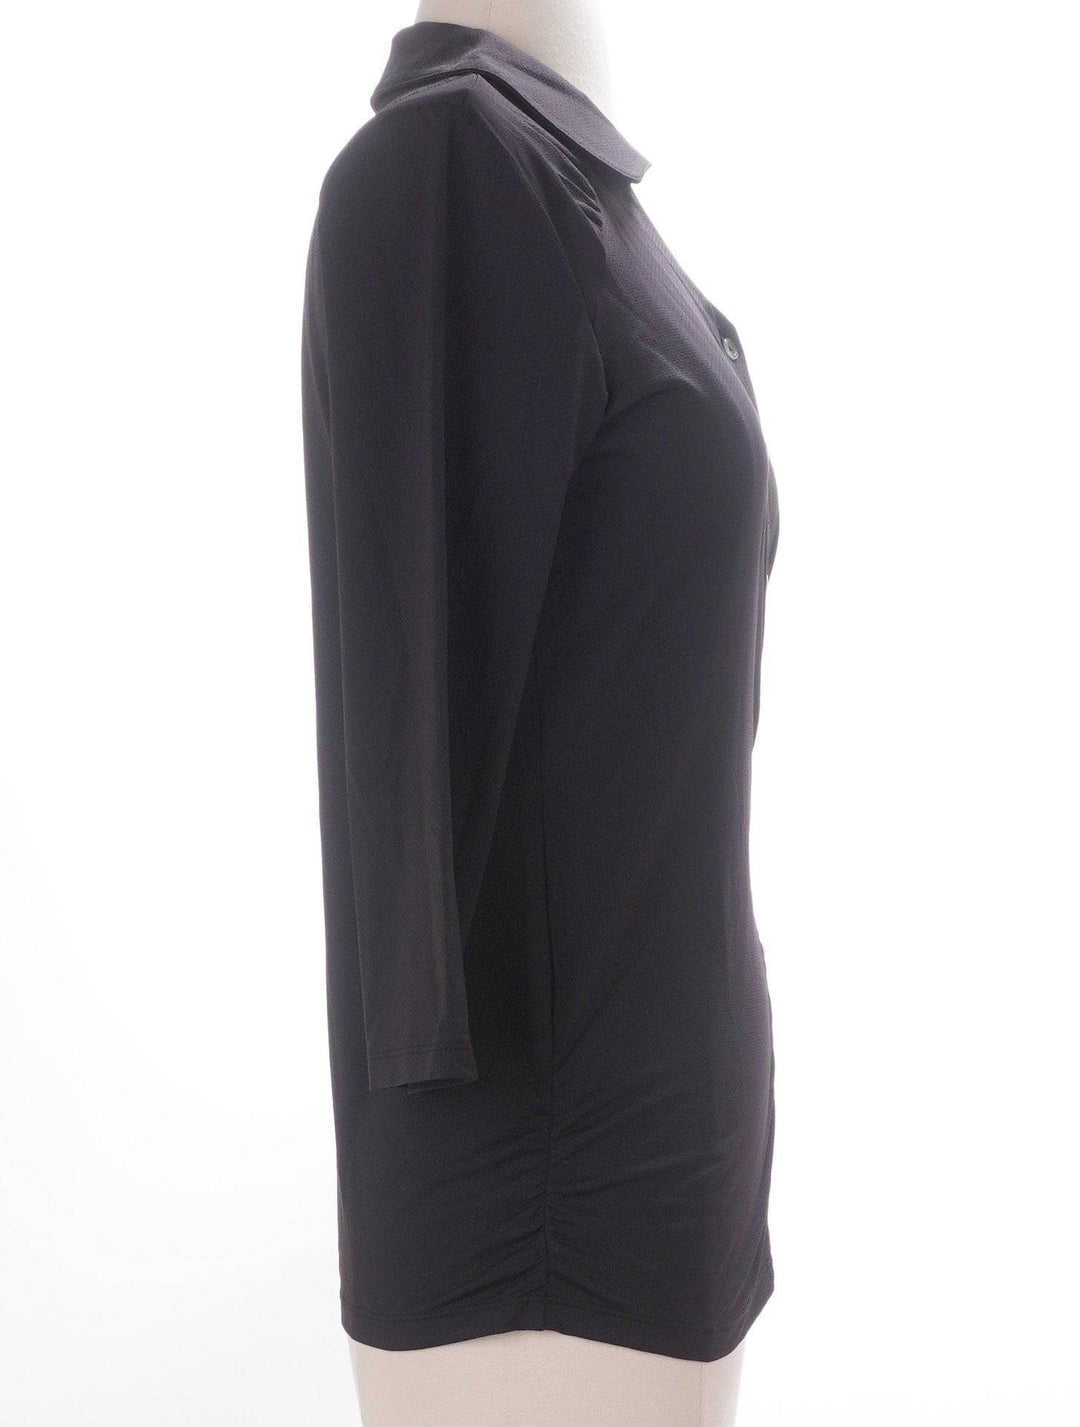 Sport Haley Black / Small / Consigned Sport Haley Long Sleeve Top - Black - Size Small